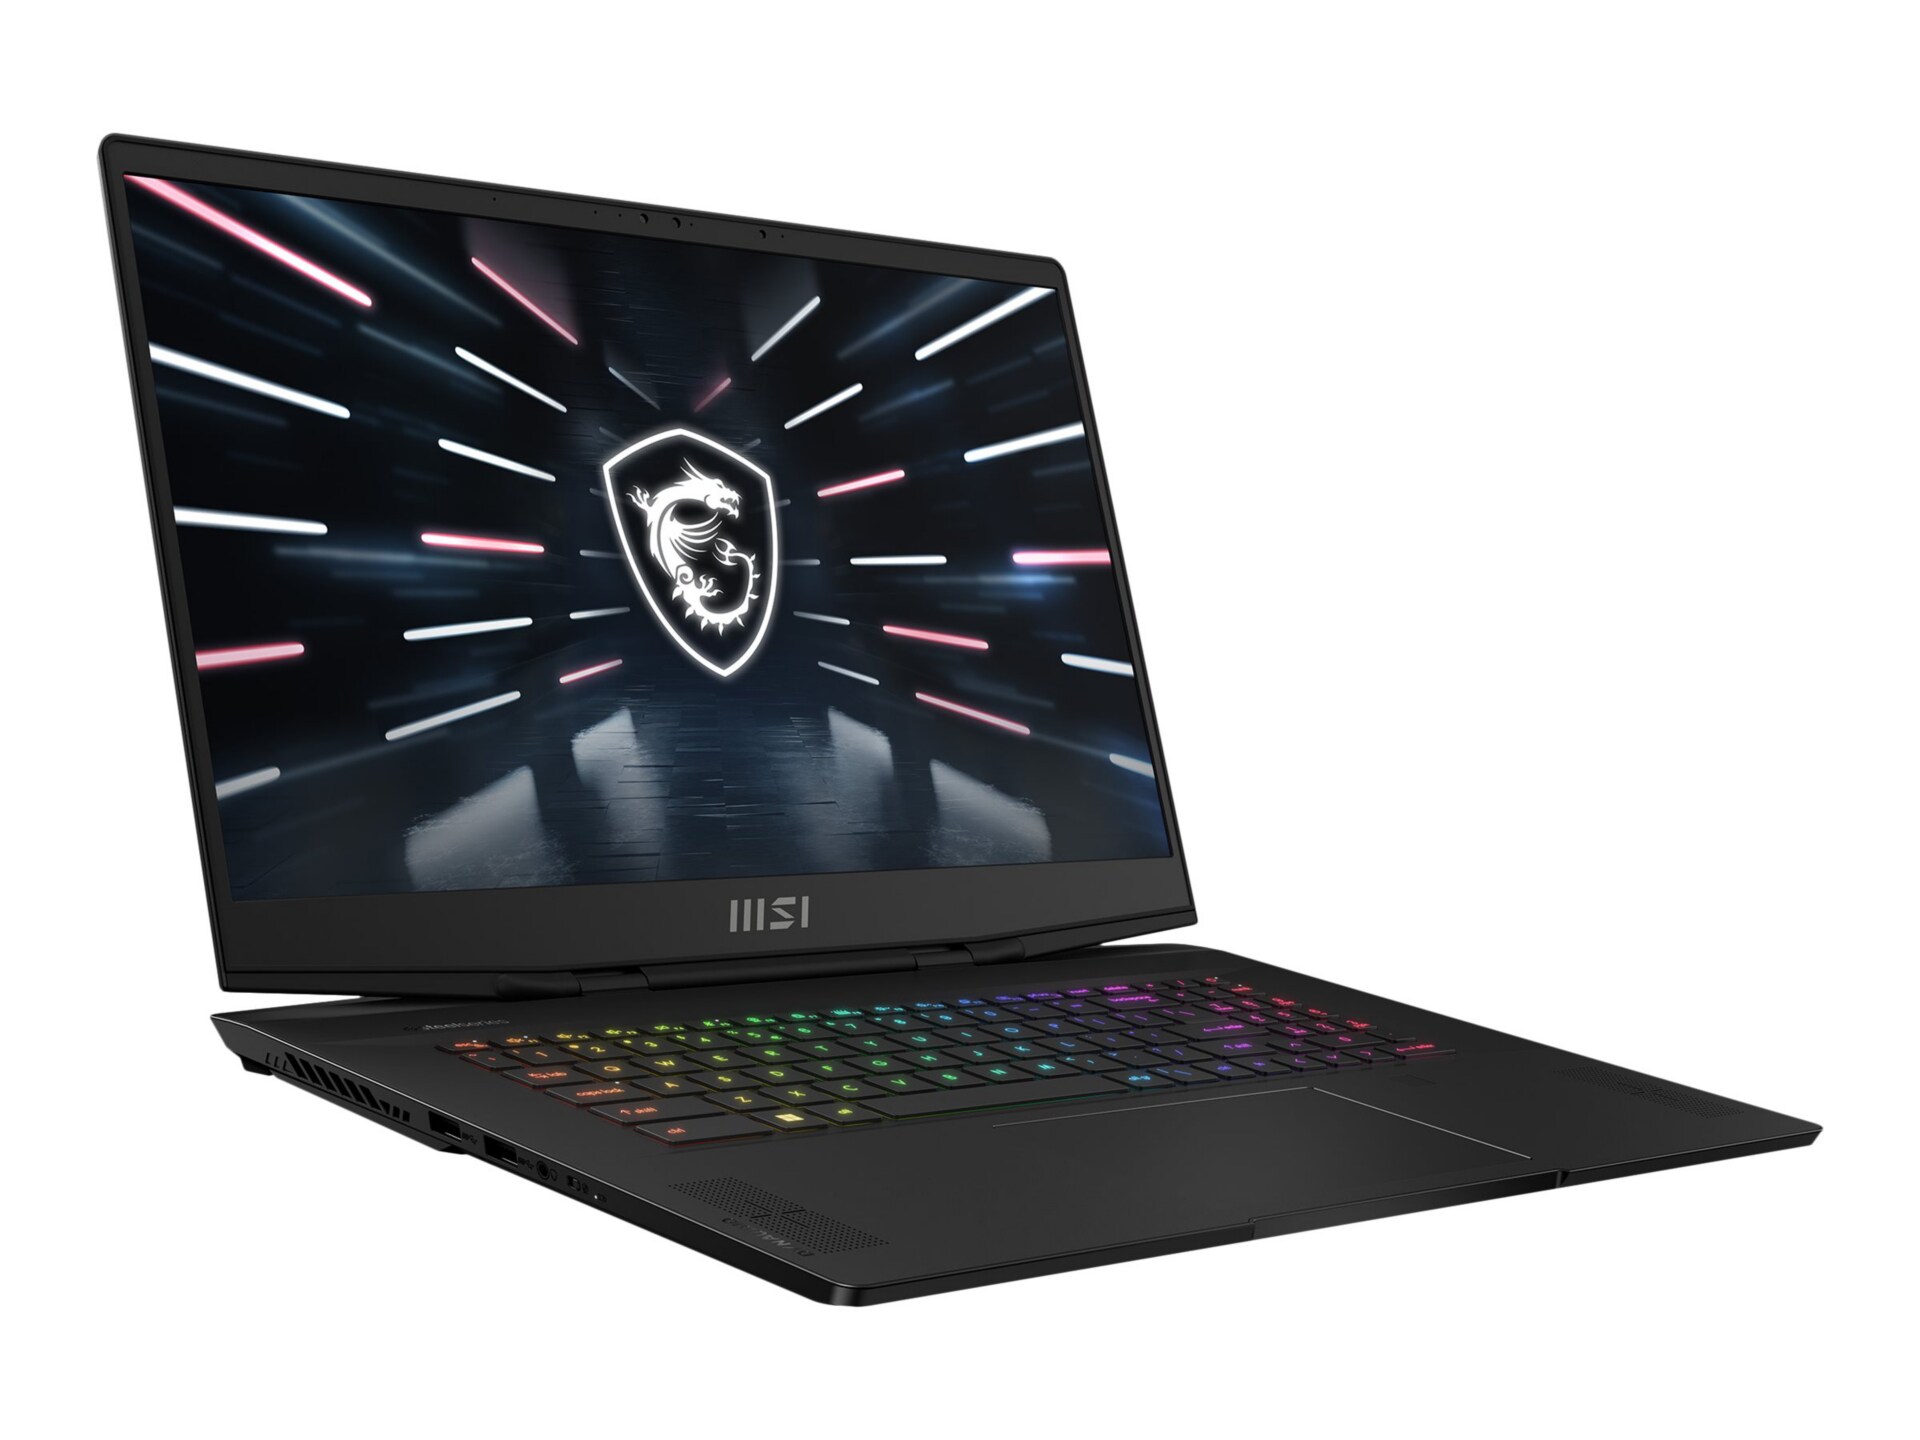 MSI Stealth GS77 12UGS Stealth GS77 12UGS-036CA 17.3" Gaming Notebook - QHD - 2560 x 1440 - Intel Core i7 12th Gen